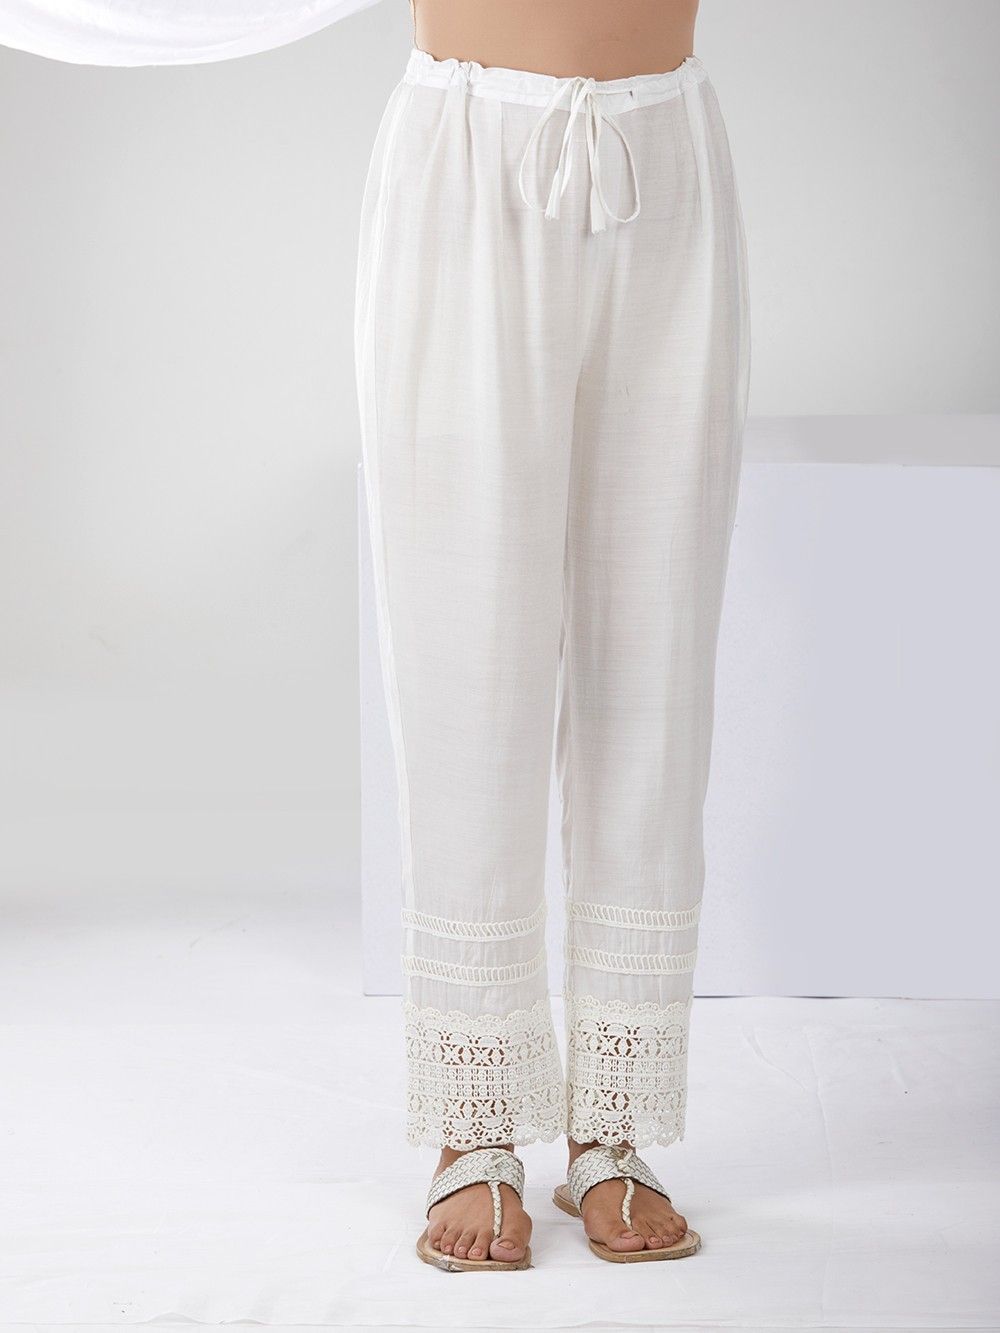 Buy Off White Cambric Cotton Pants  SB00177SHAB14  The loom